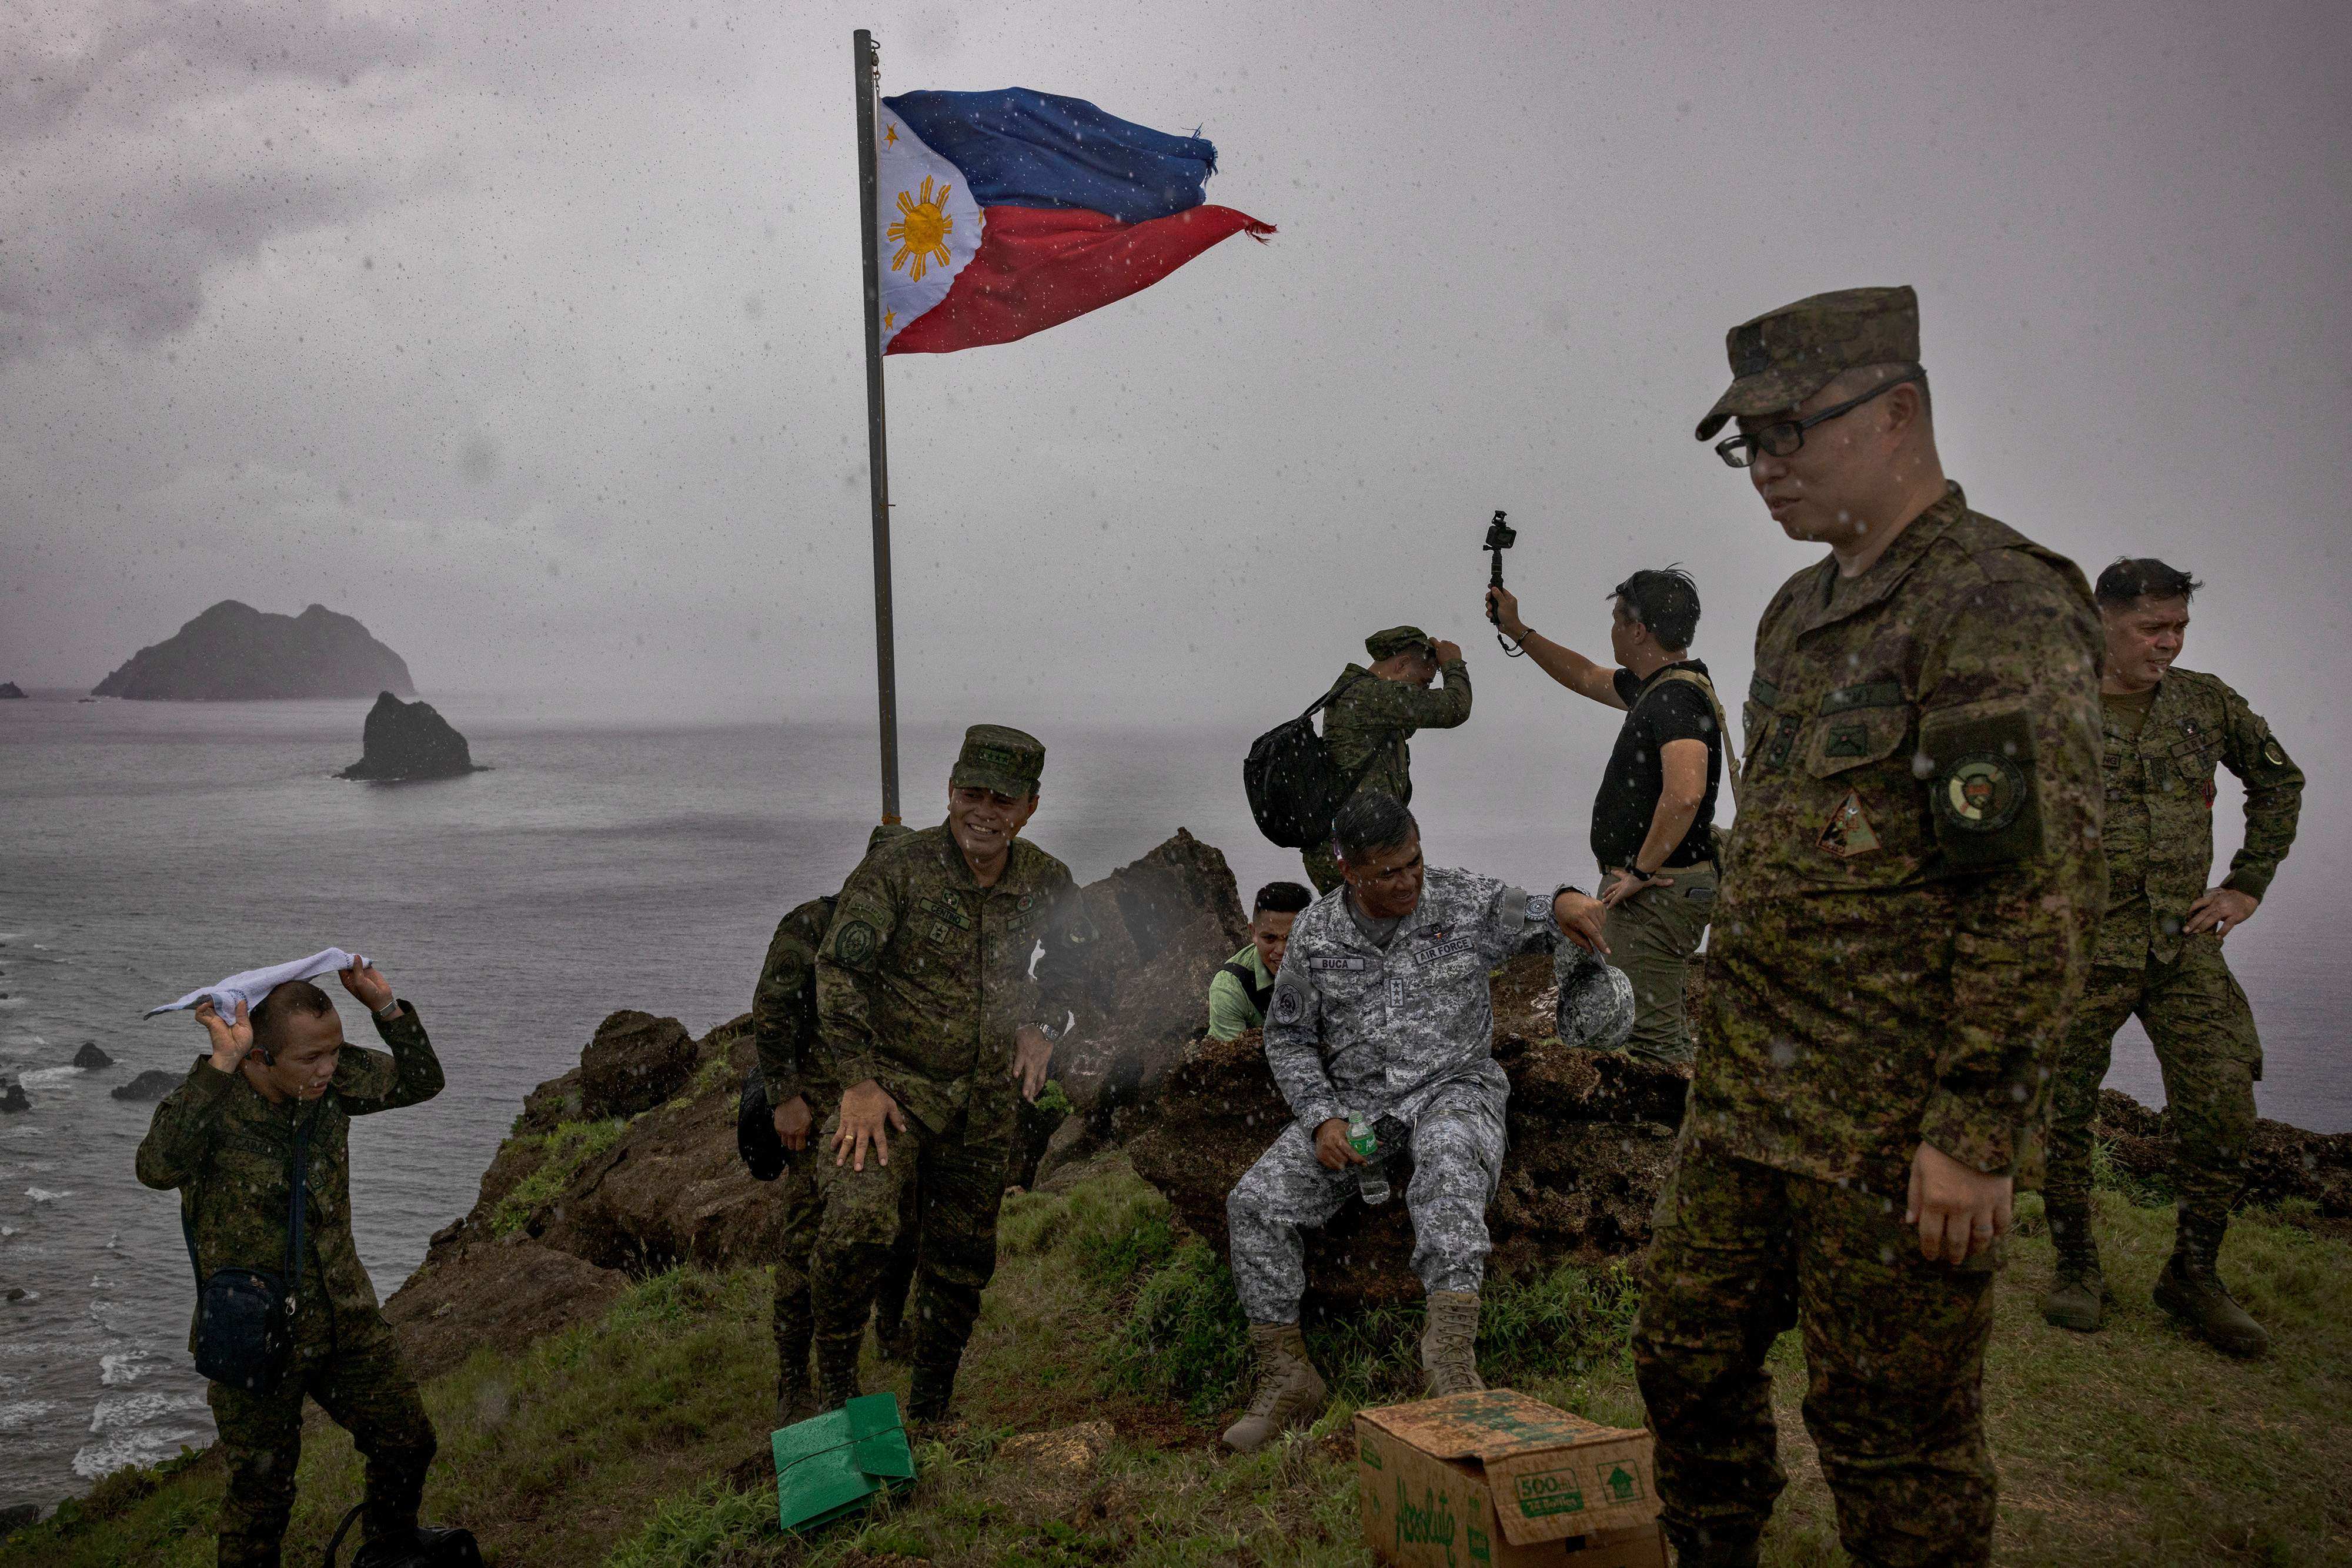 Filipino soldiers take pictures next to a Philippine flag in Mavulis Island, Batanes. Batanes, the Philippines’ smallest province located less than 200km (124 miles) from Taiwan. Photo: AFP